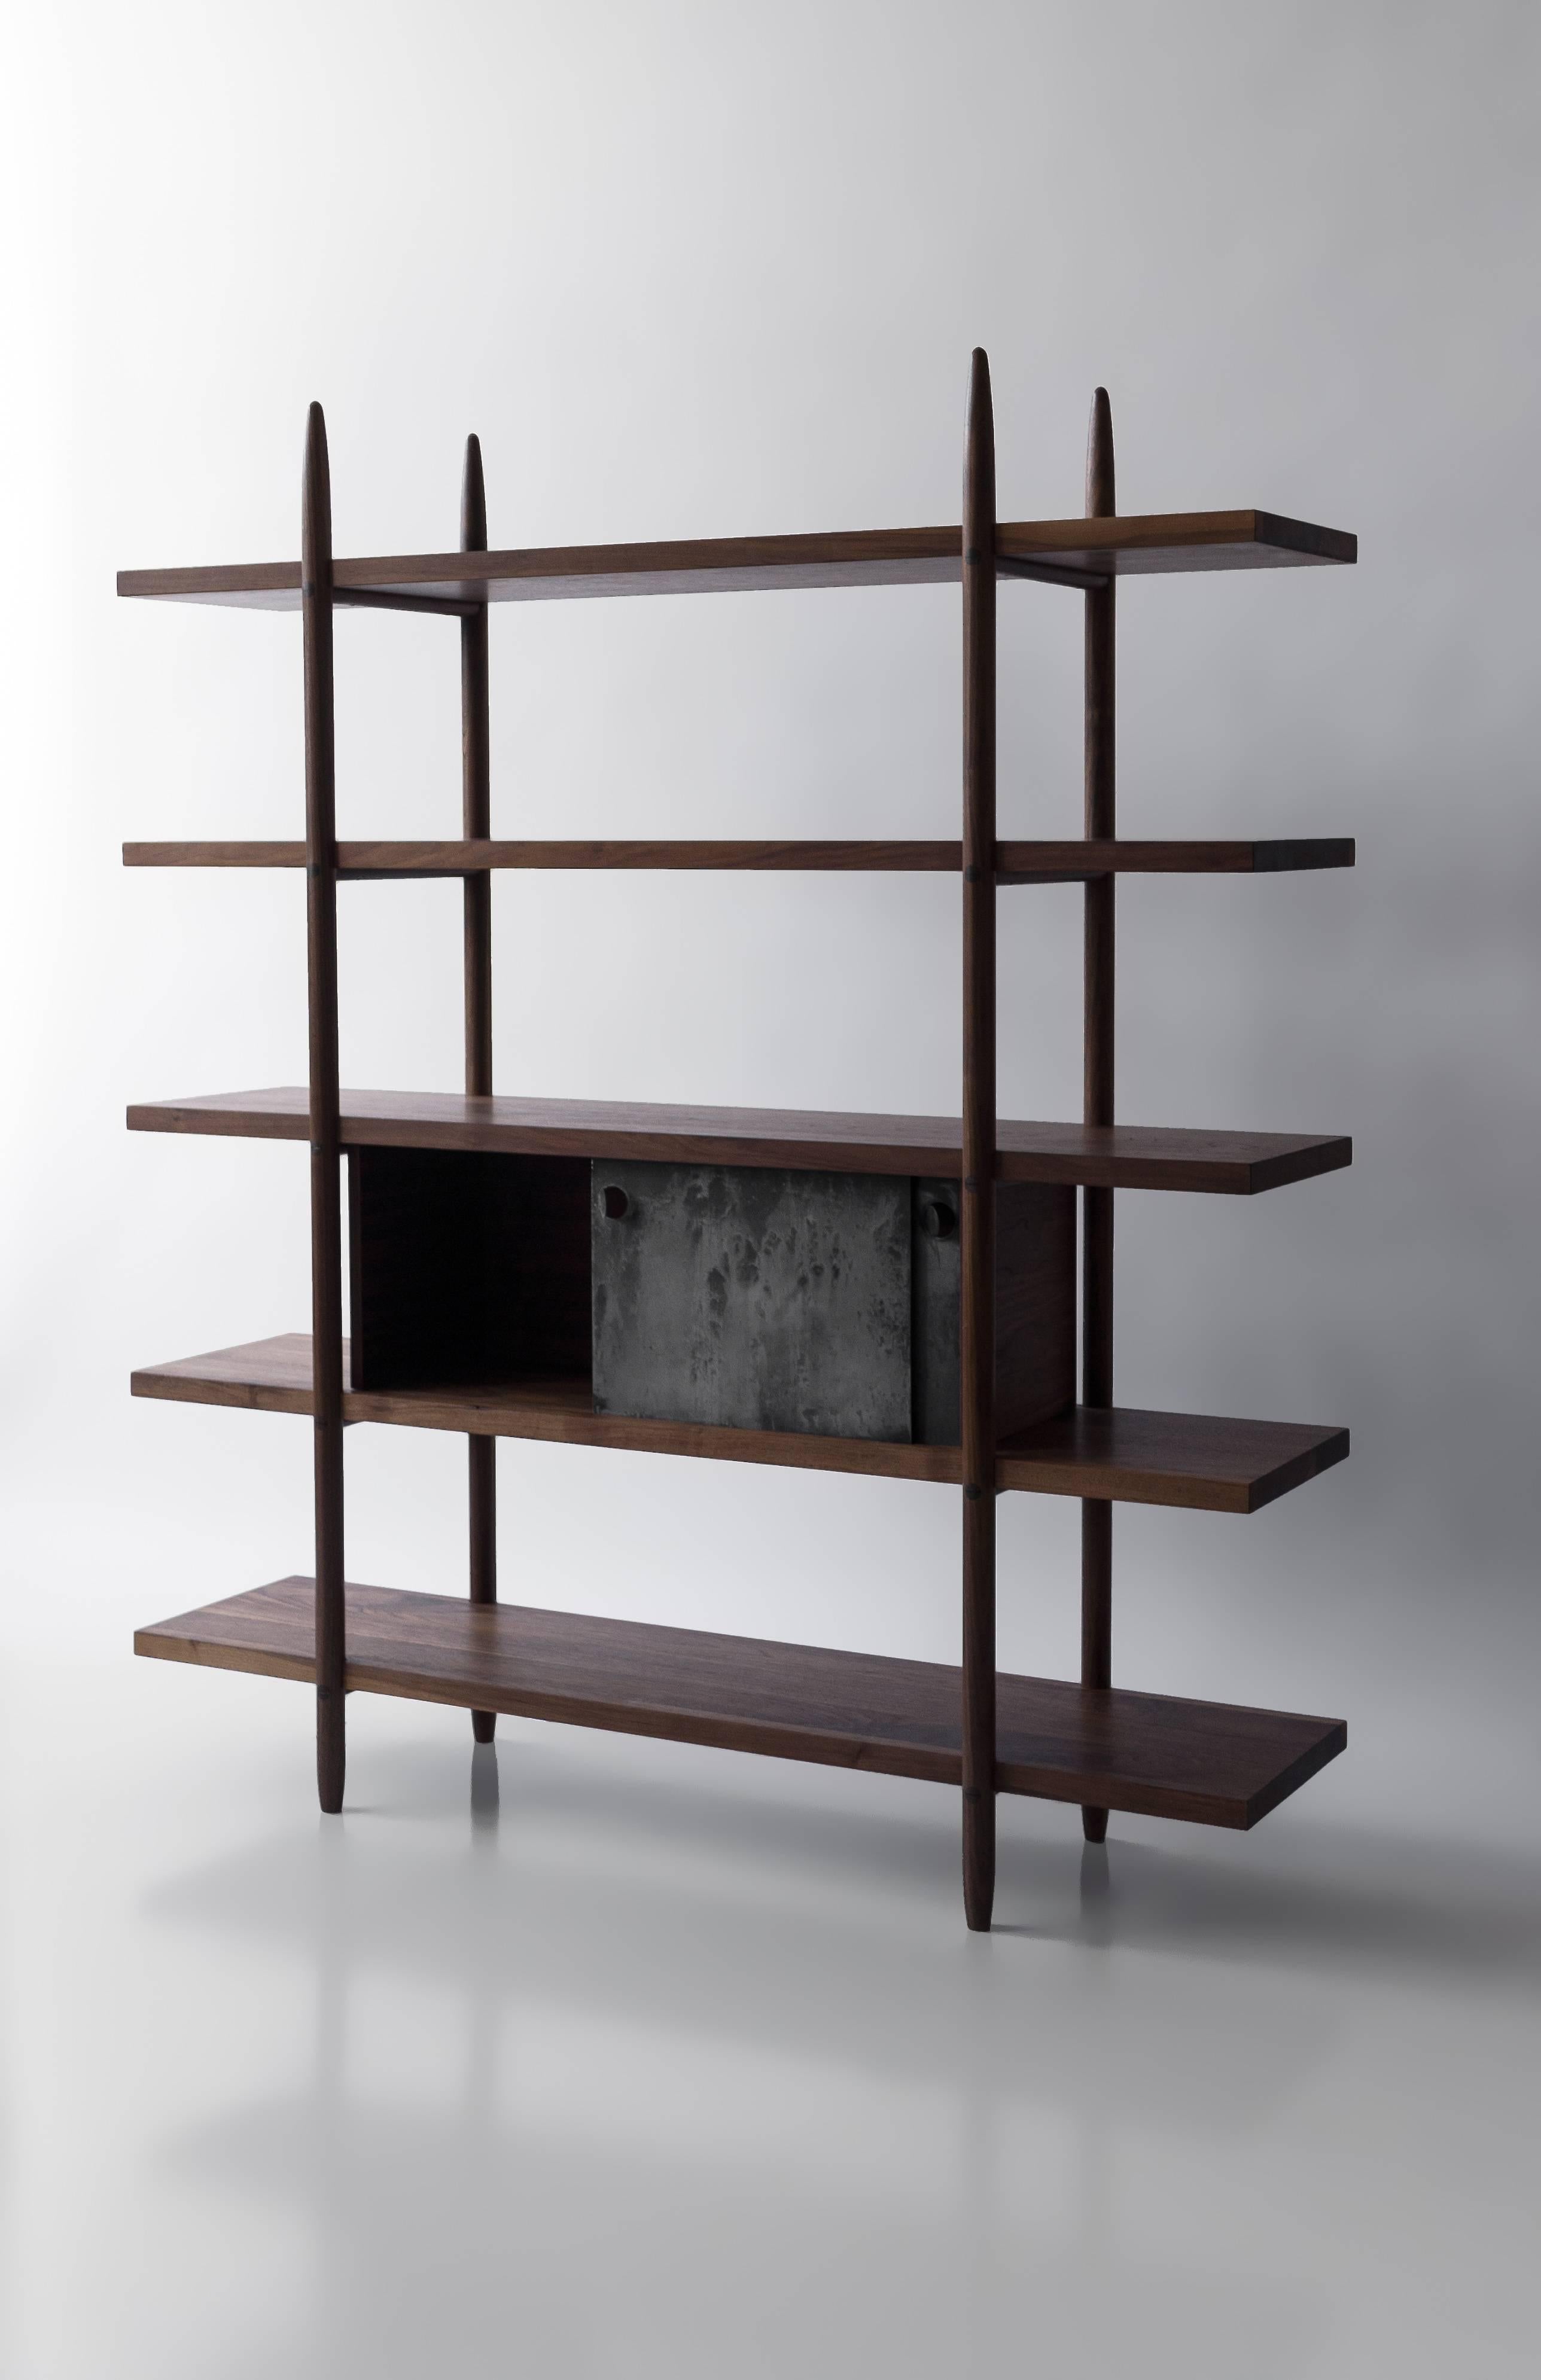 Contemporary Deepstep Shelving, Maple and Ebony Modular Storage with Fine Wood Detailing